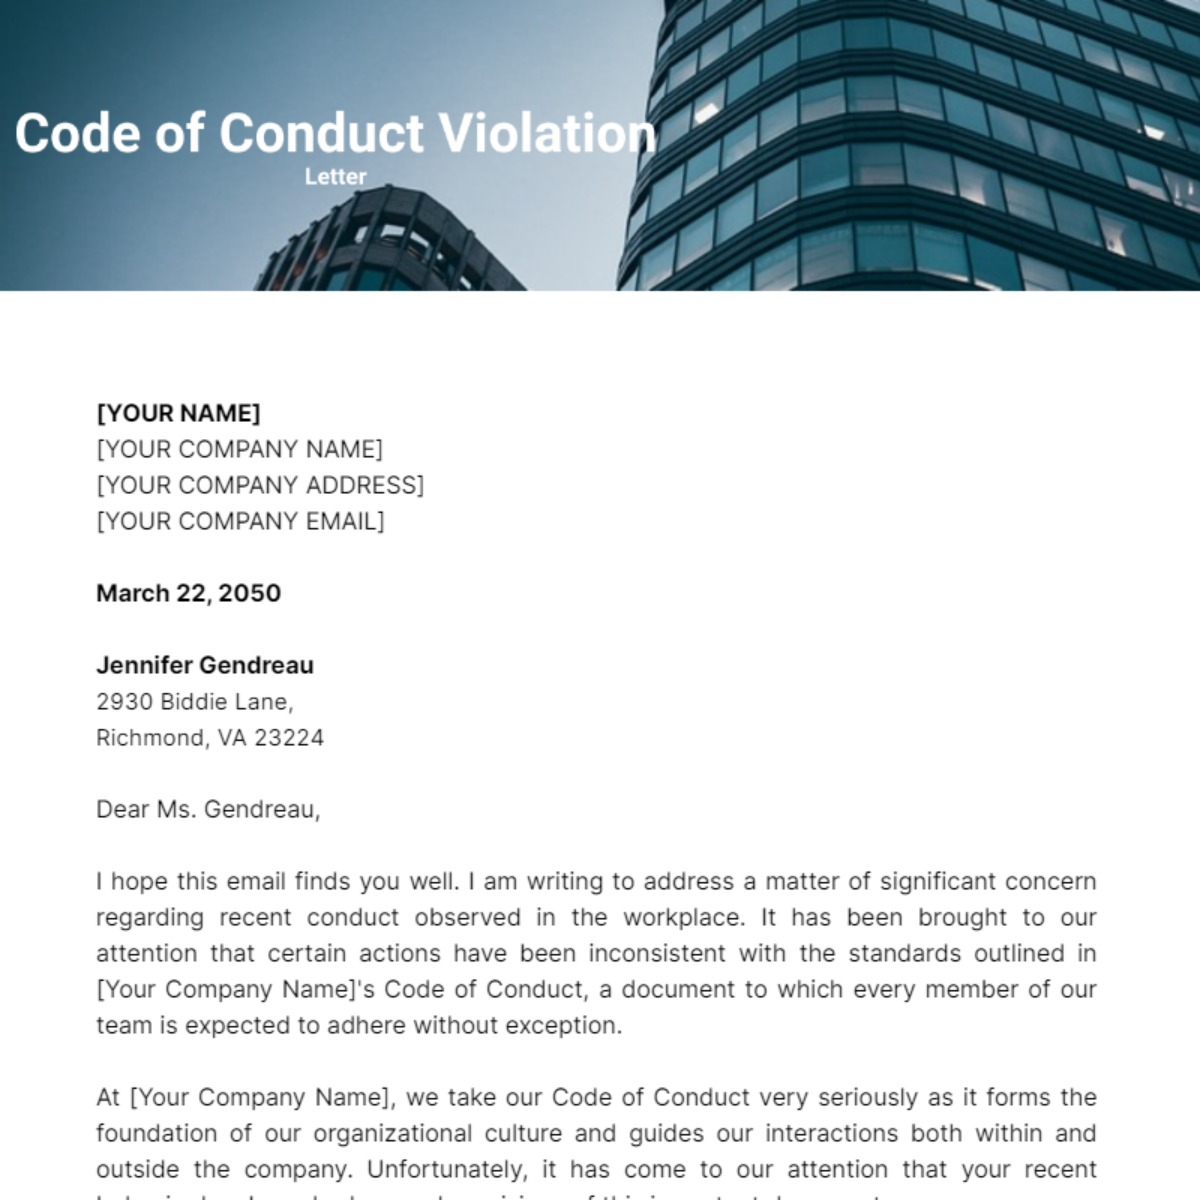 Code of Conduct Violation Letter Template